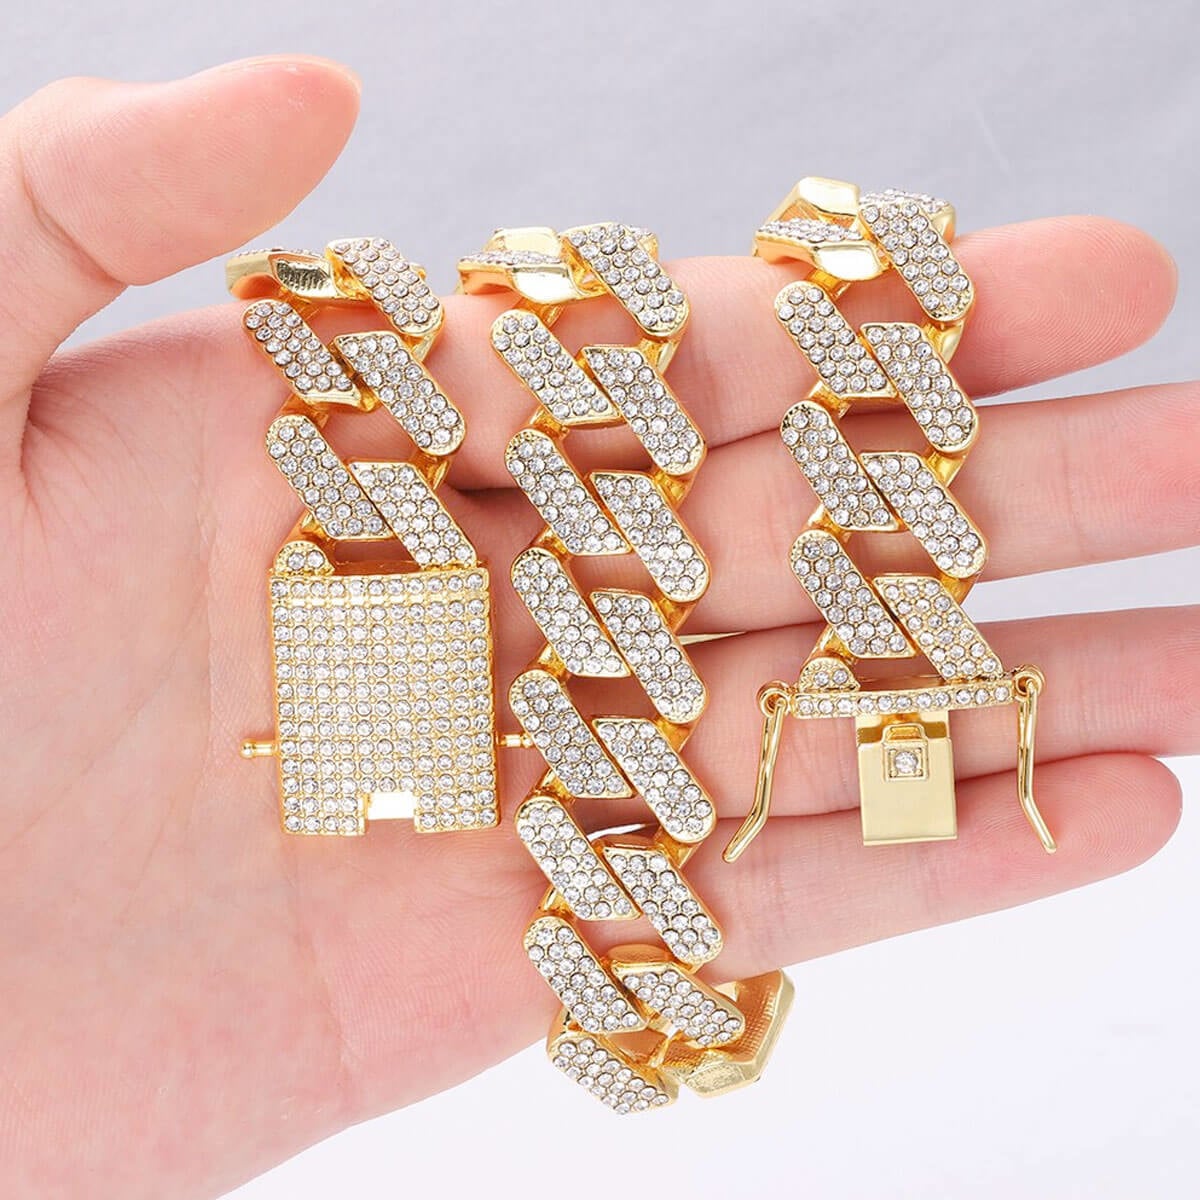 20 mm Iced Out Cuban Chain Big Diamond Necklace